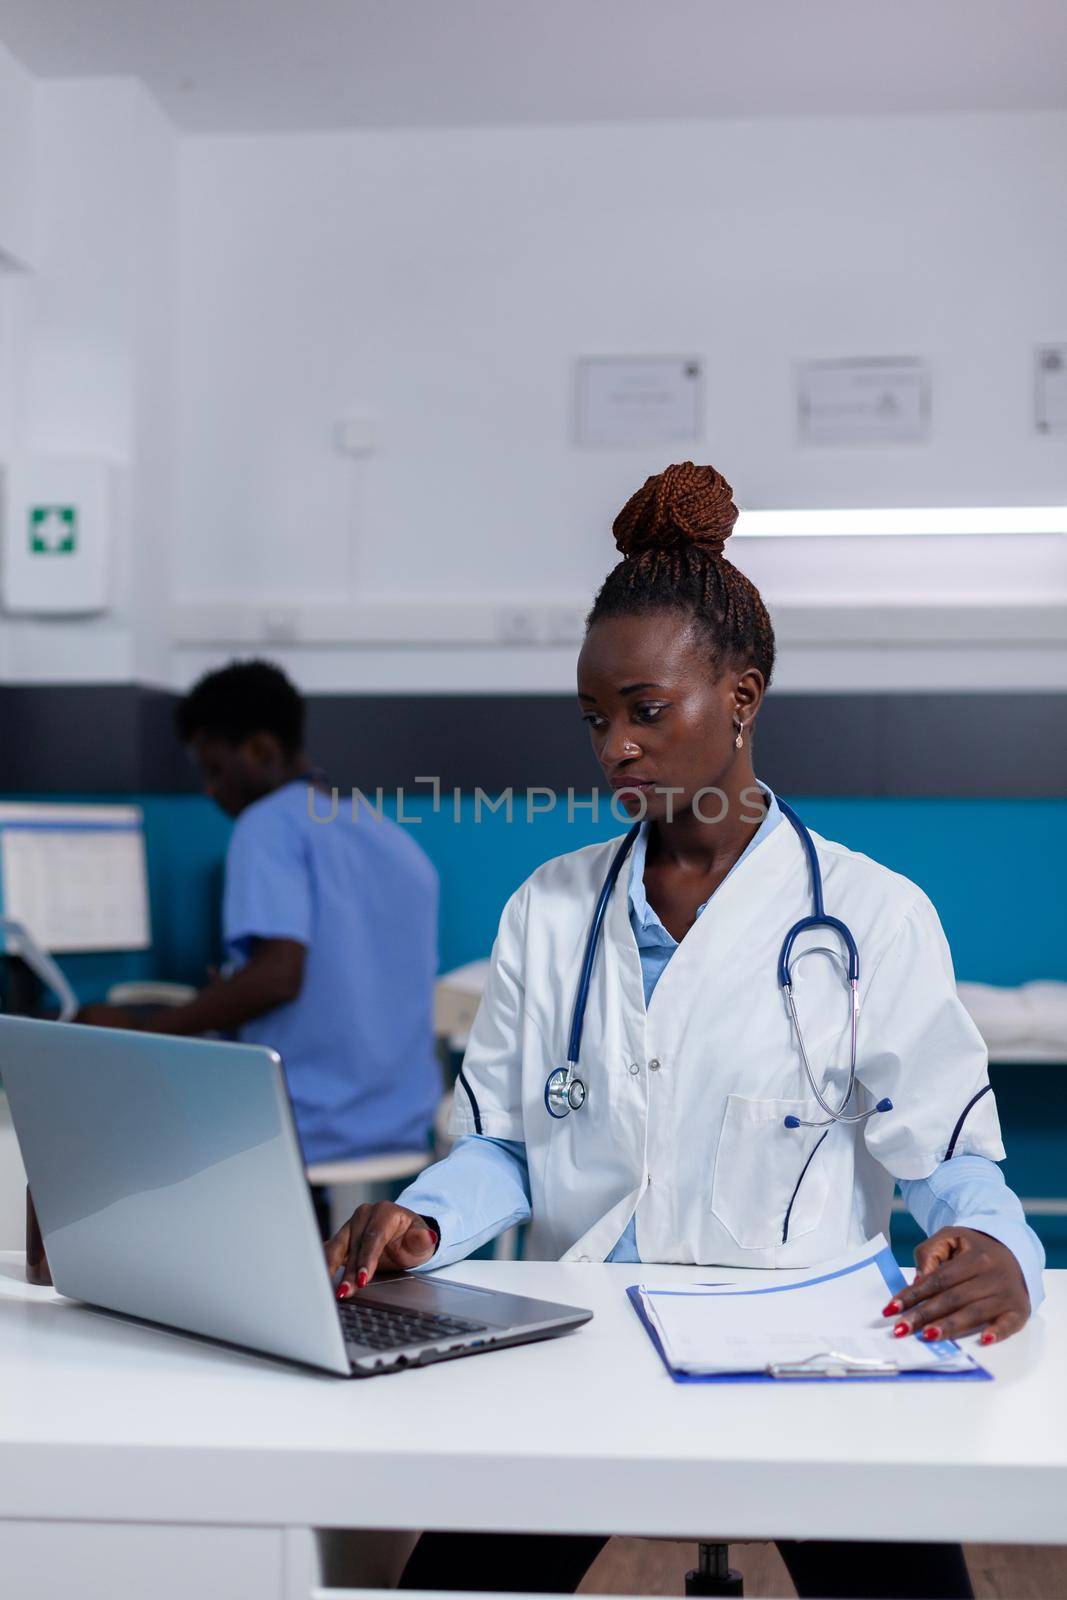 African american person with medic job using laptop at desk in medical office. Black doctor sitting with technology and healthcare equipment while nurse looking at computer in background